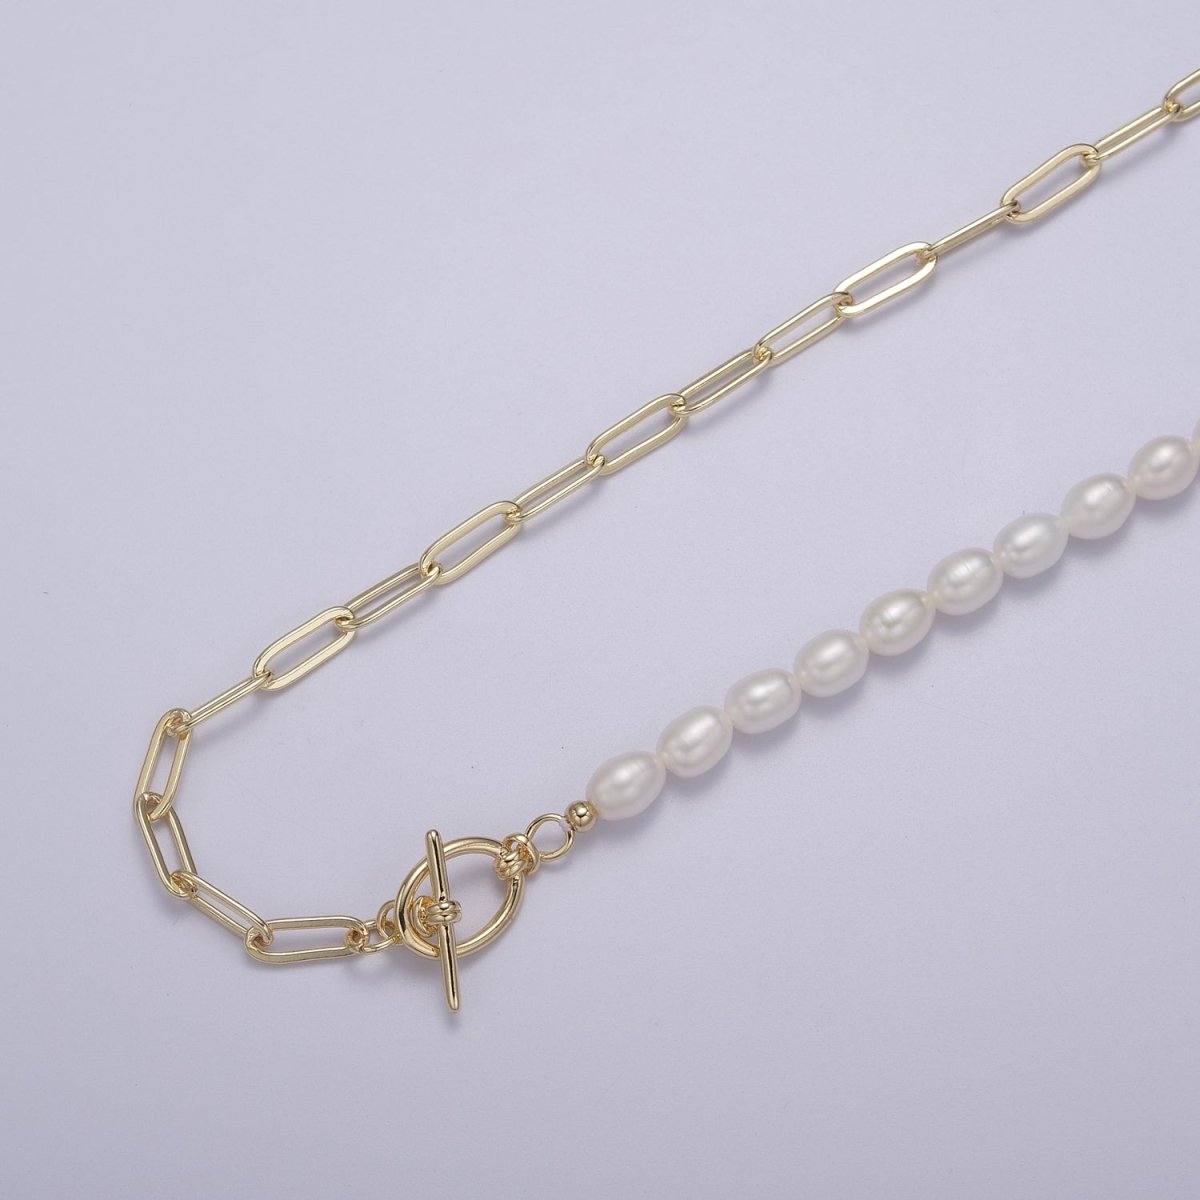 Half beaded half chain necklace in 18k gold filled | Layer Necklace paper clip chain rectangle | White Freshwater Pearl | WA-863 Clearance Pricing - DLUXCA